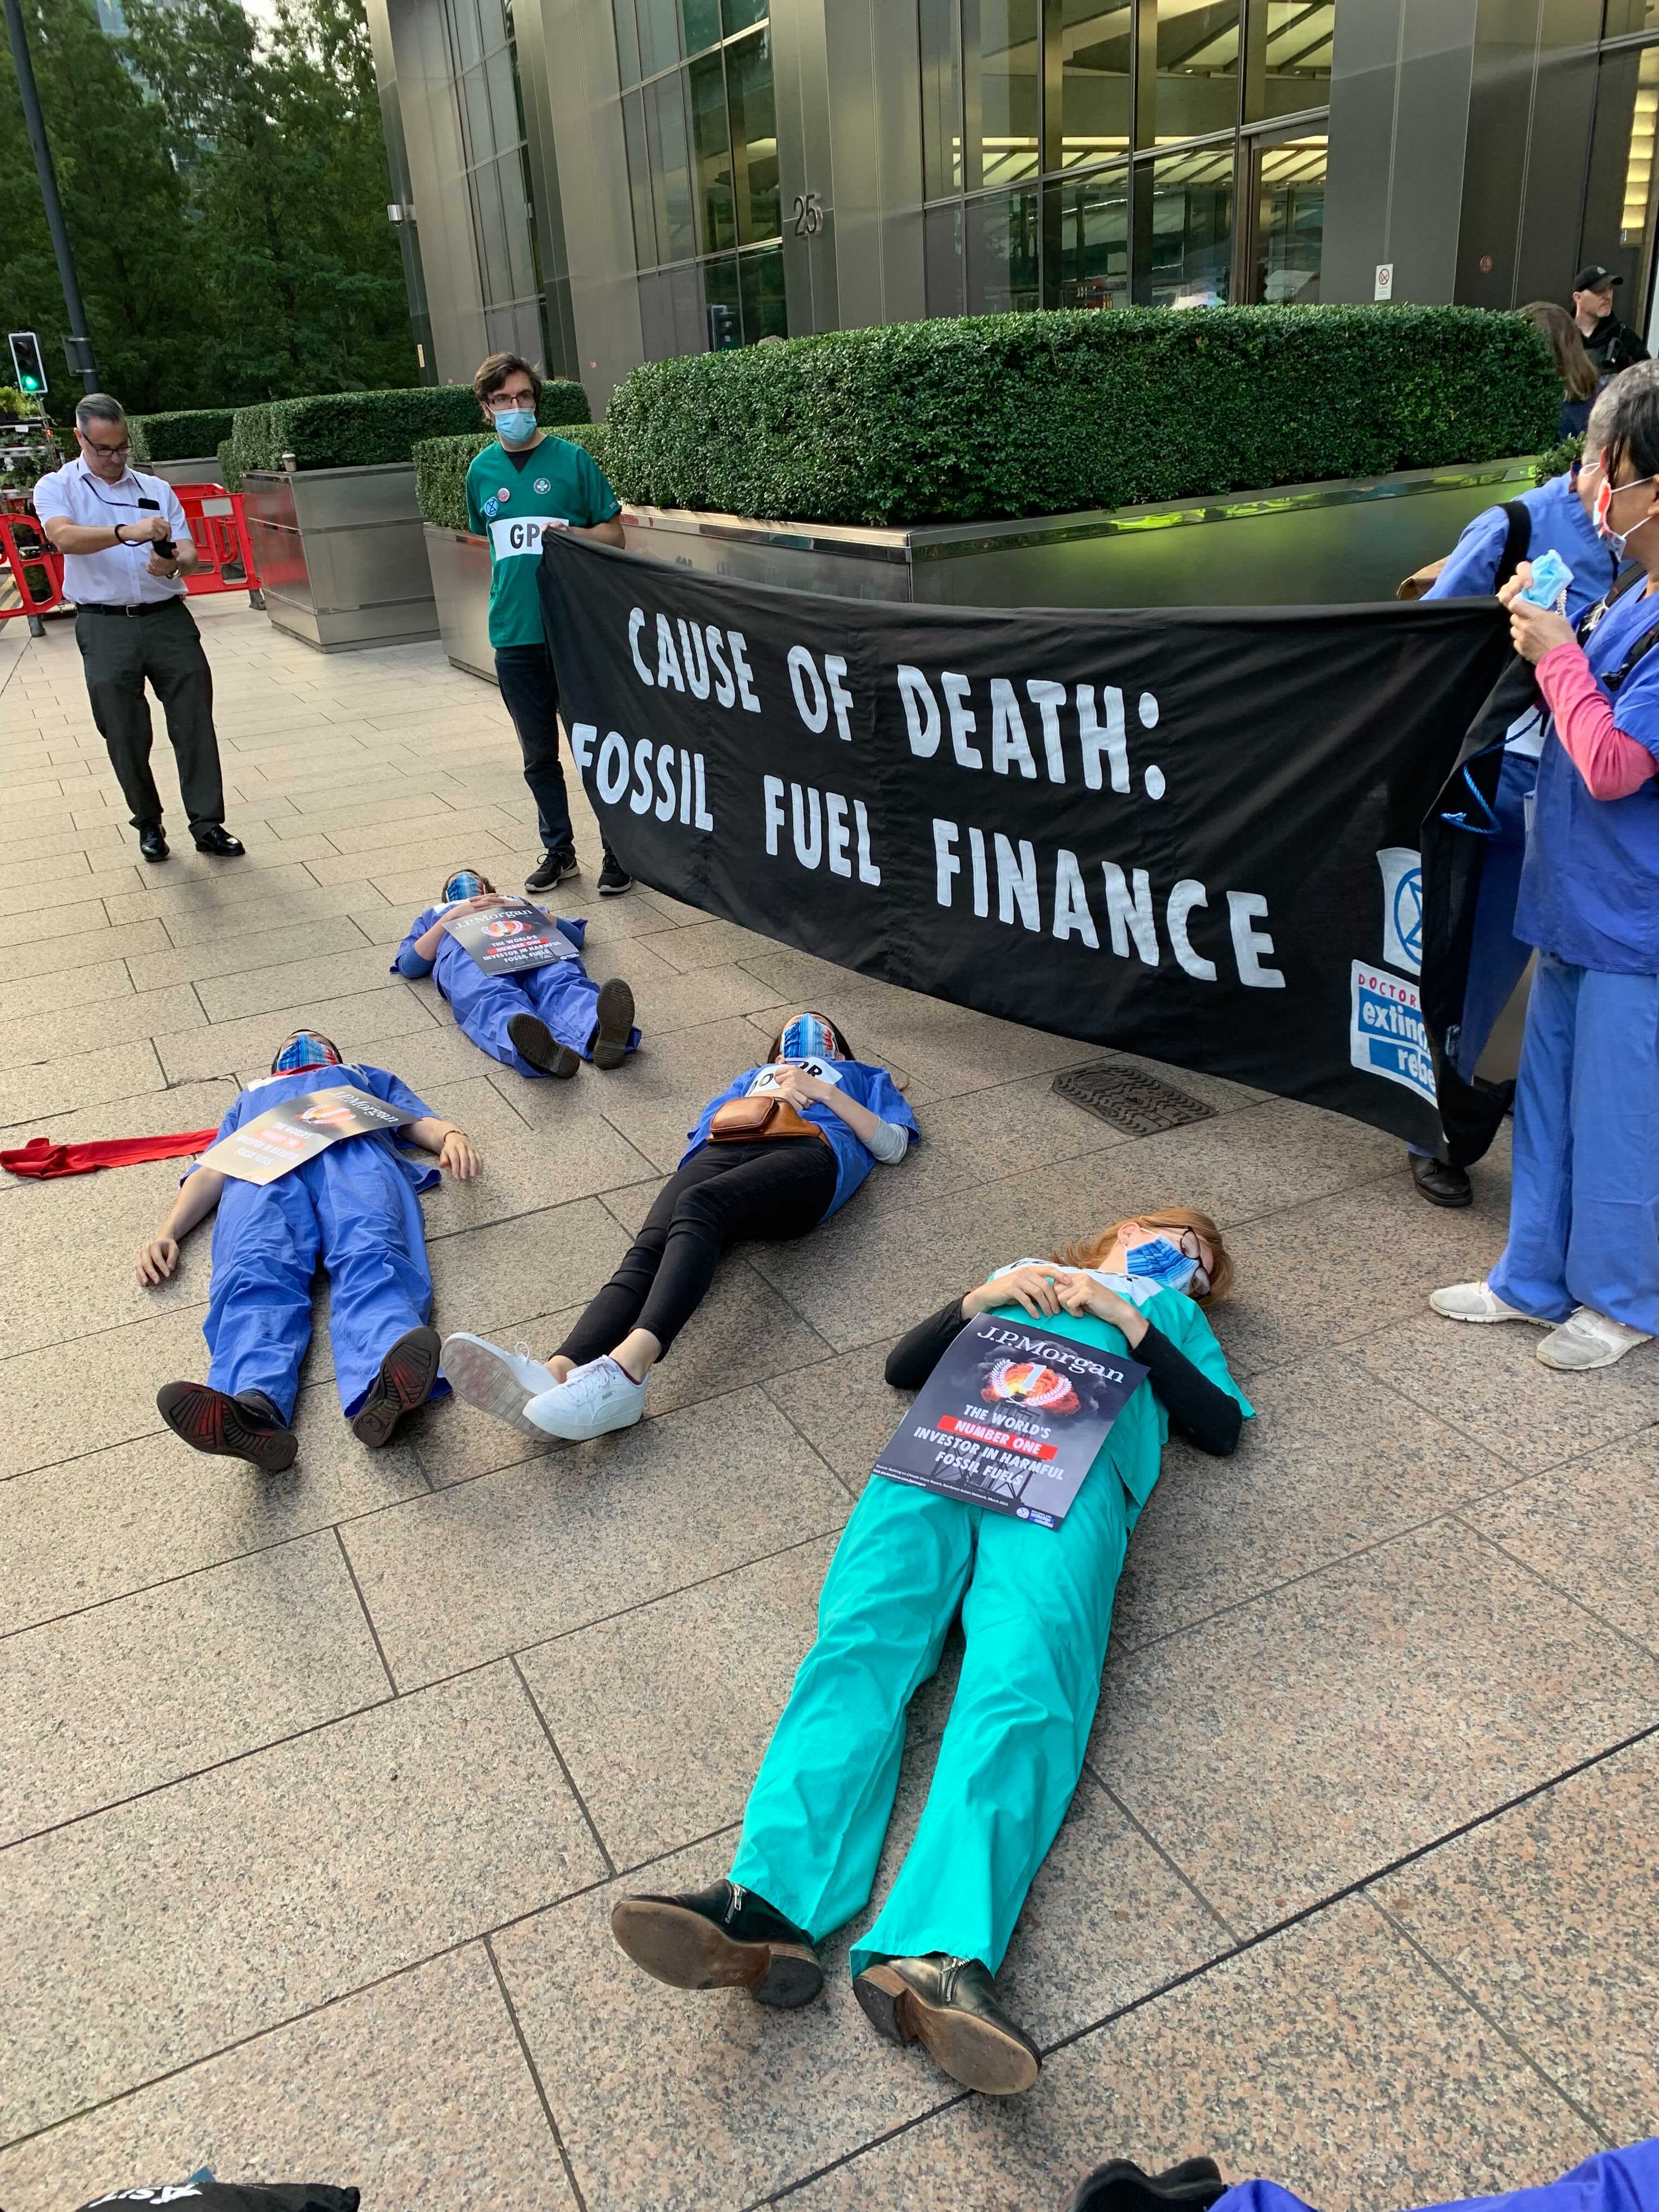 Protesters dressed in their scrubs lay on the floor and held banners in Canary Wharf